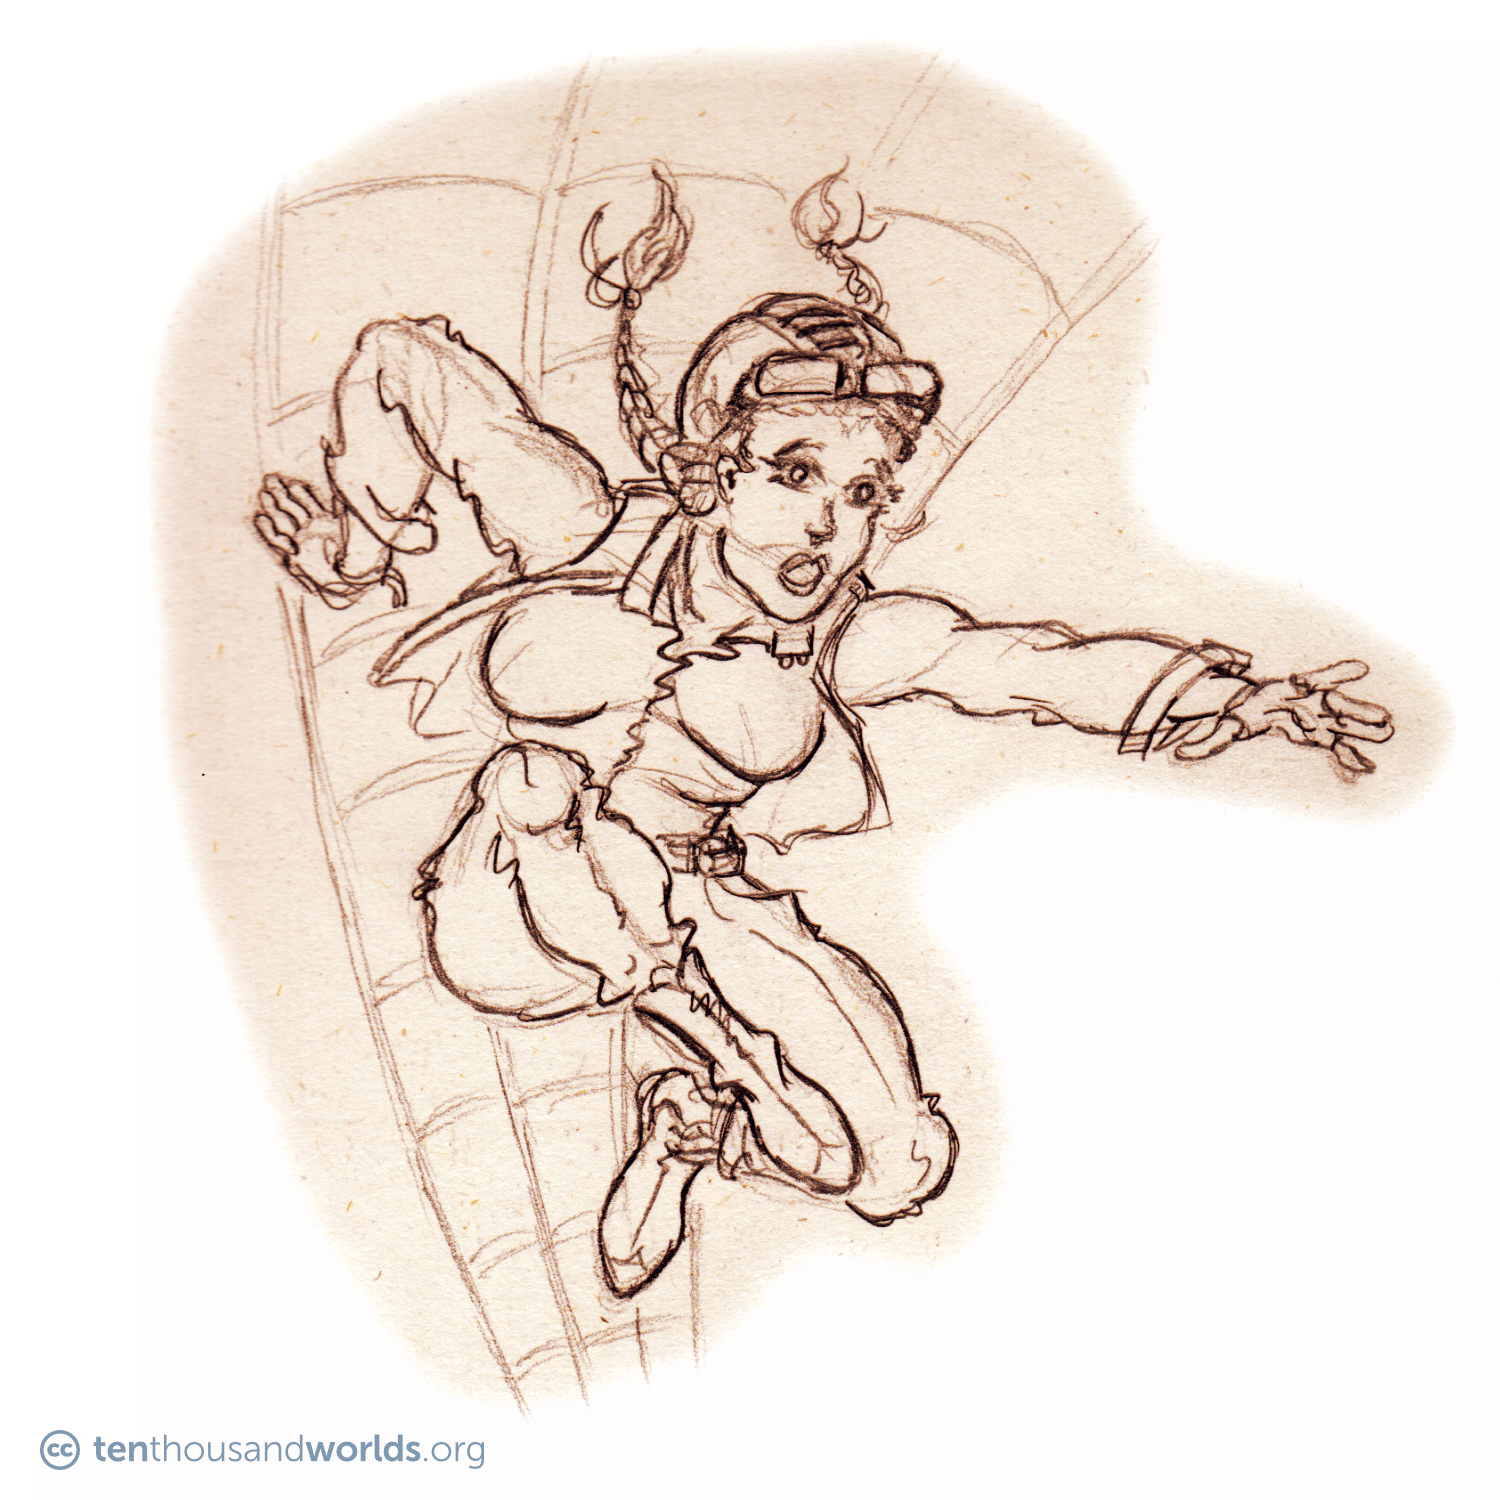 A pencil sketch of a woman in coveralls, a vest, lace-up boots, leather cap and goggles, leaping into the air from some sort of ship’s rigging, her braids flying behind her.